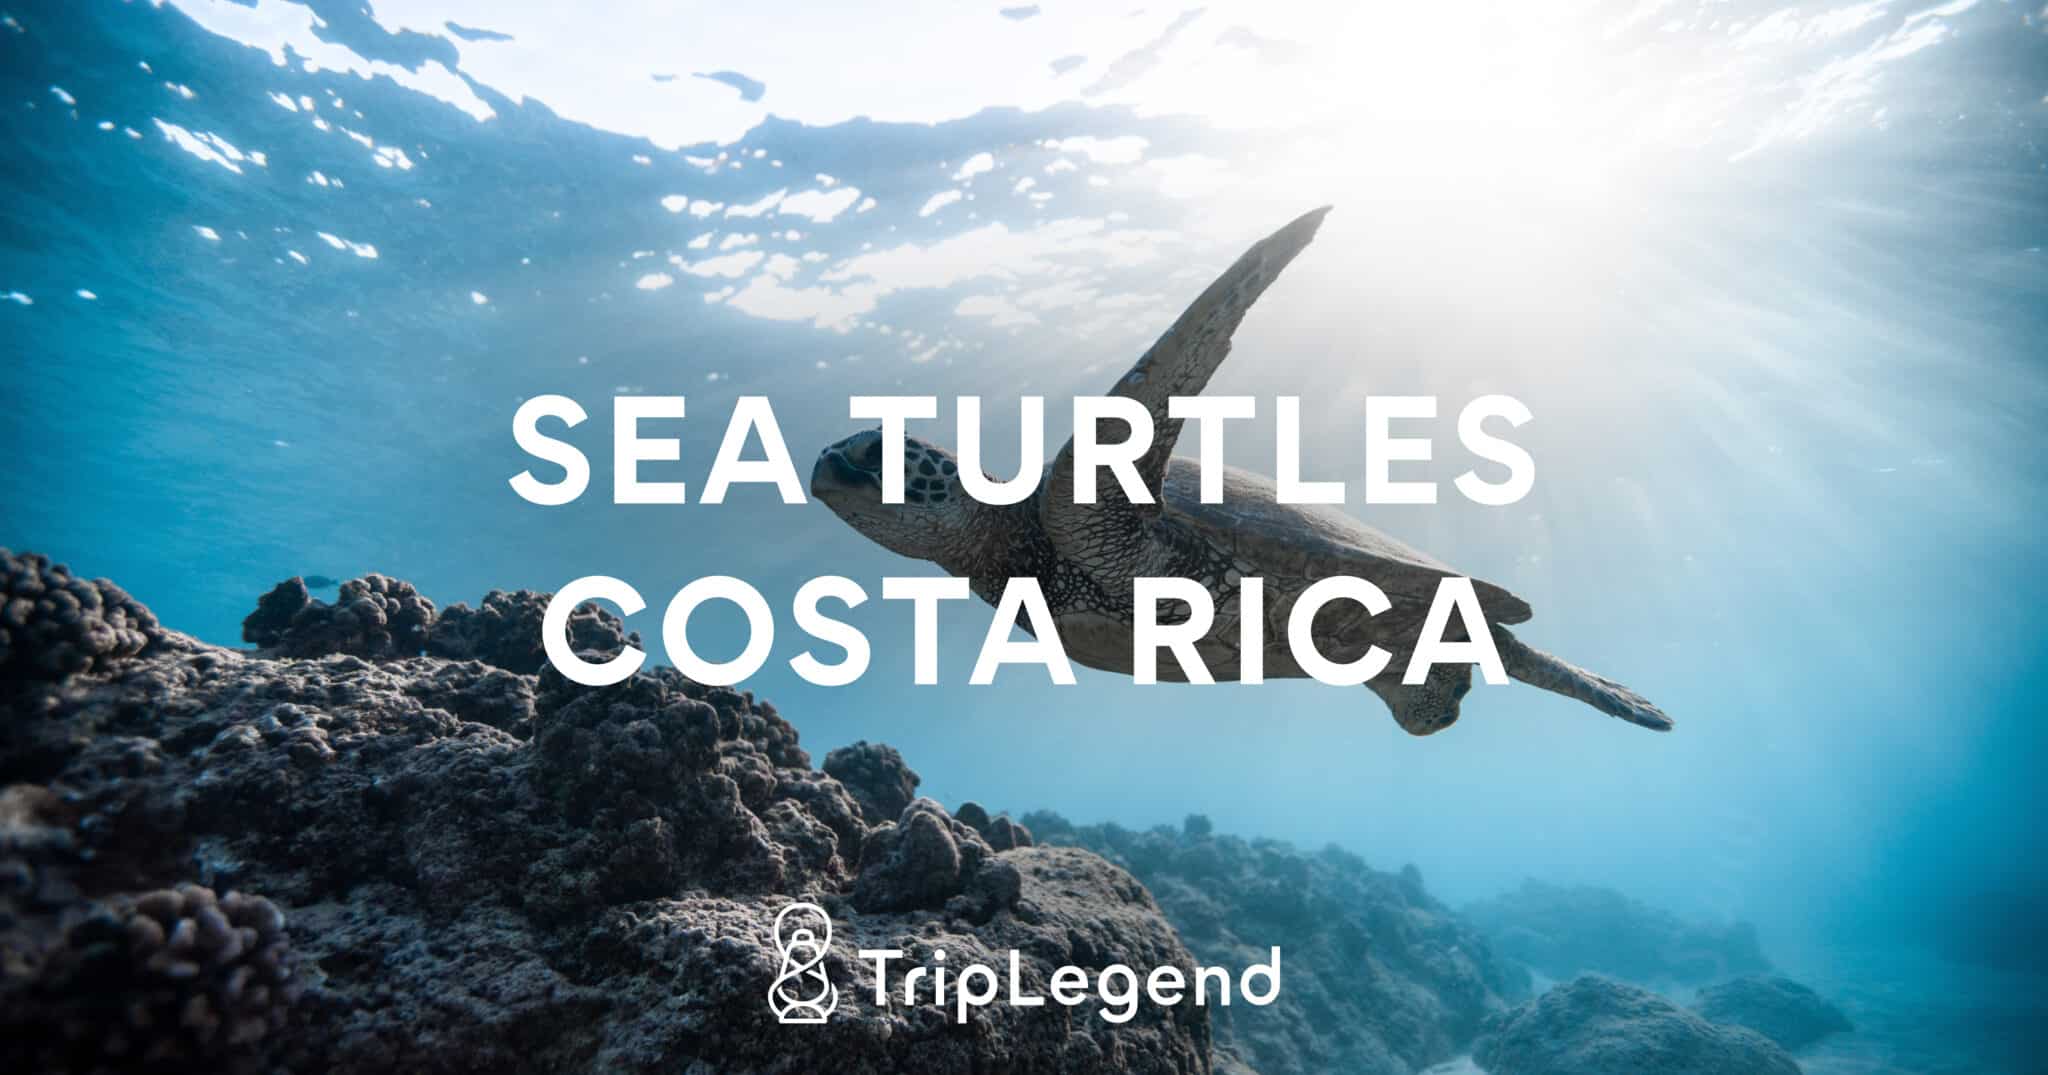 Protection of sea turtles in Costa Rica